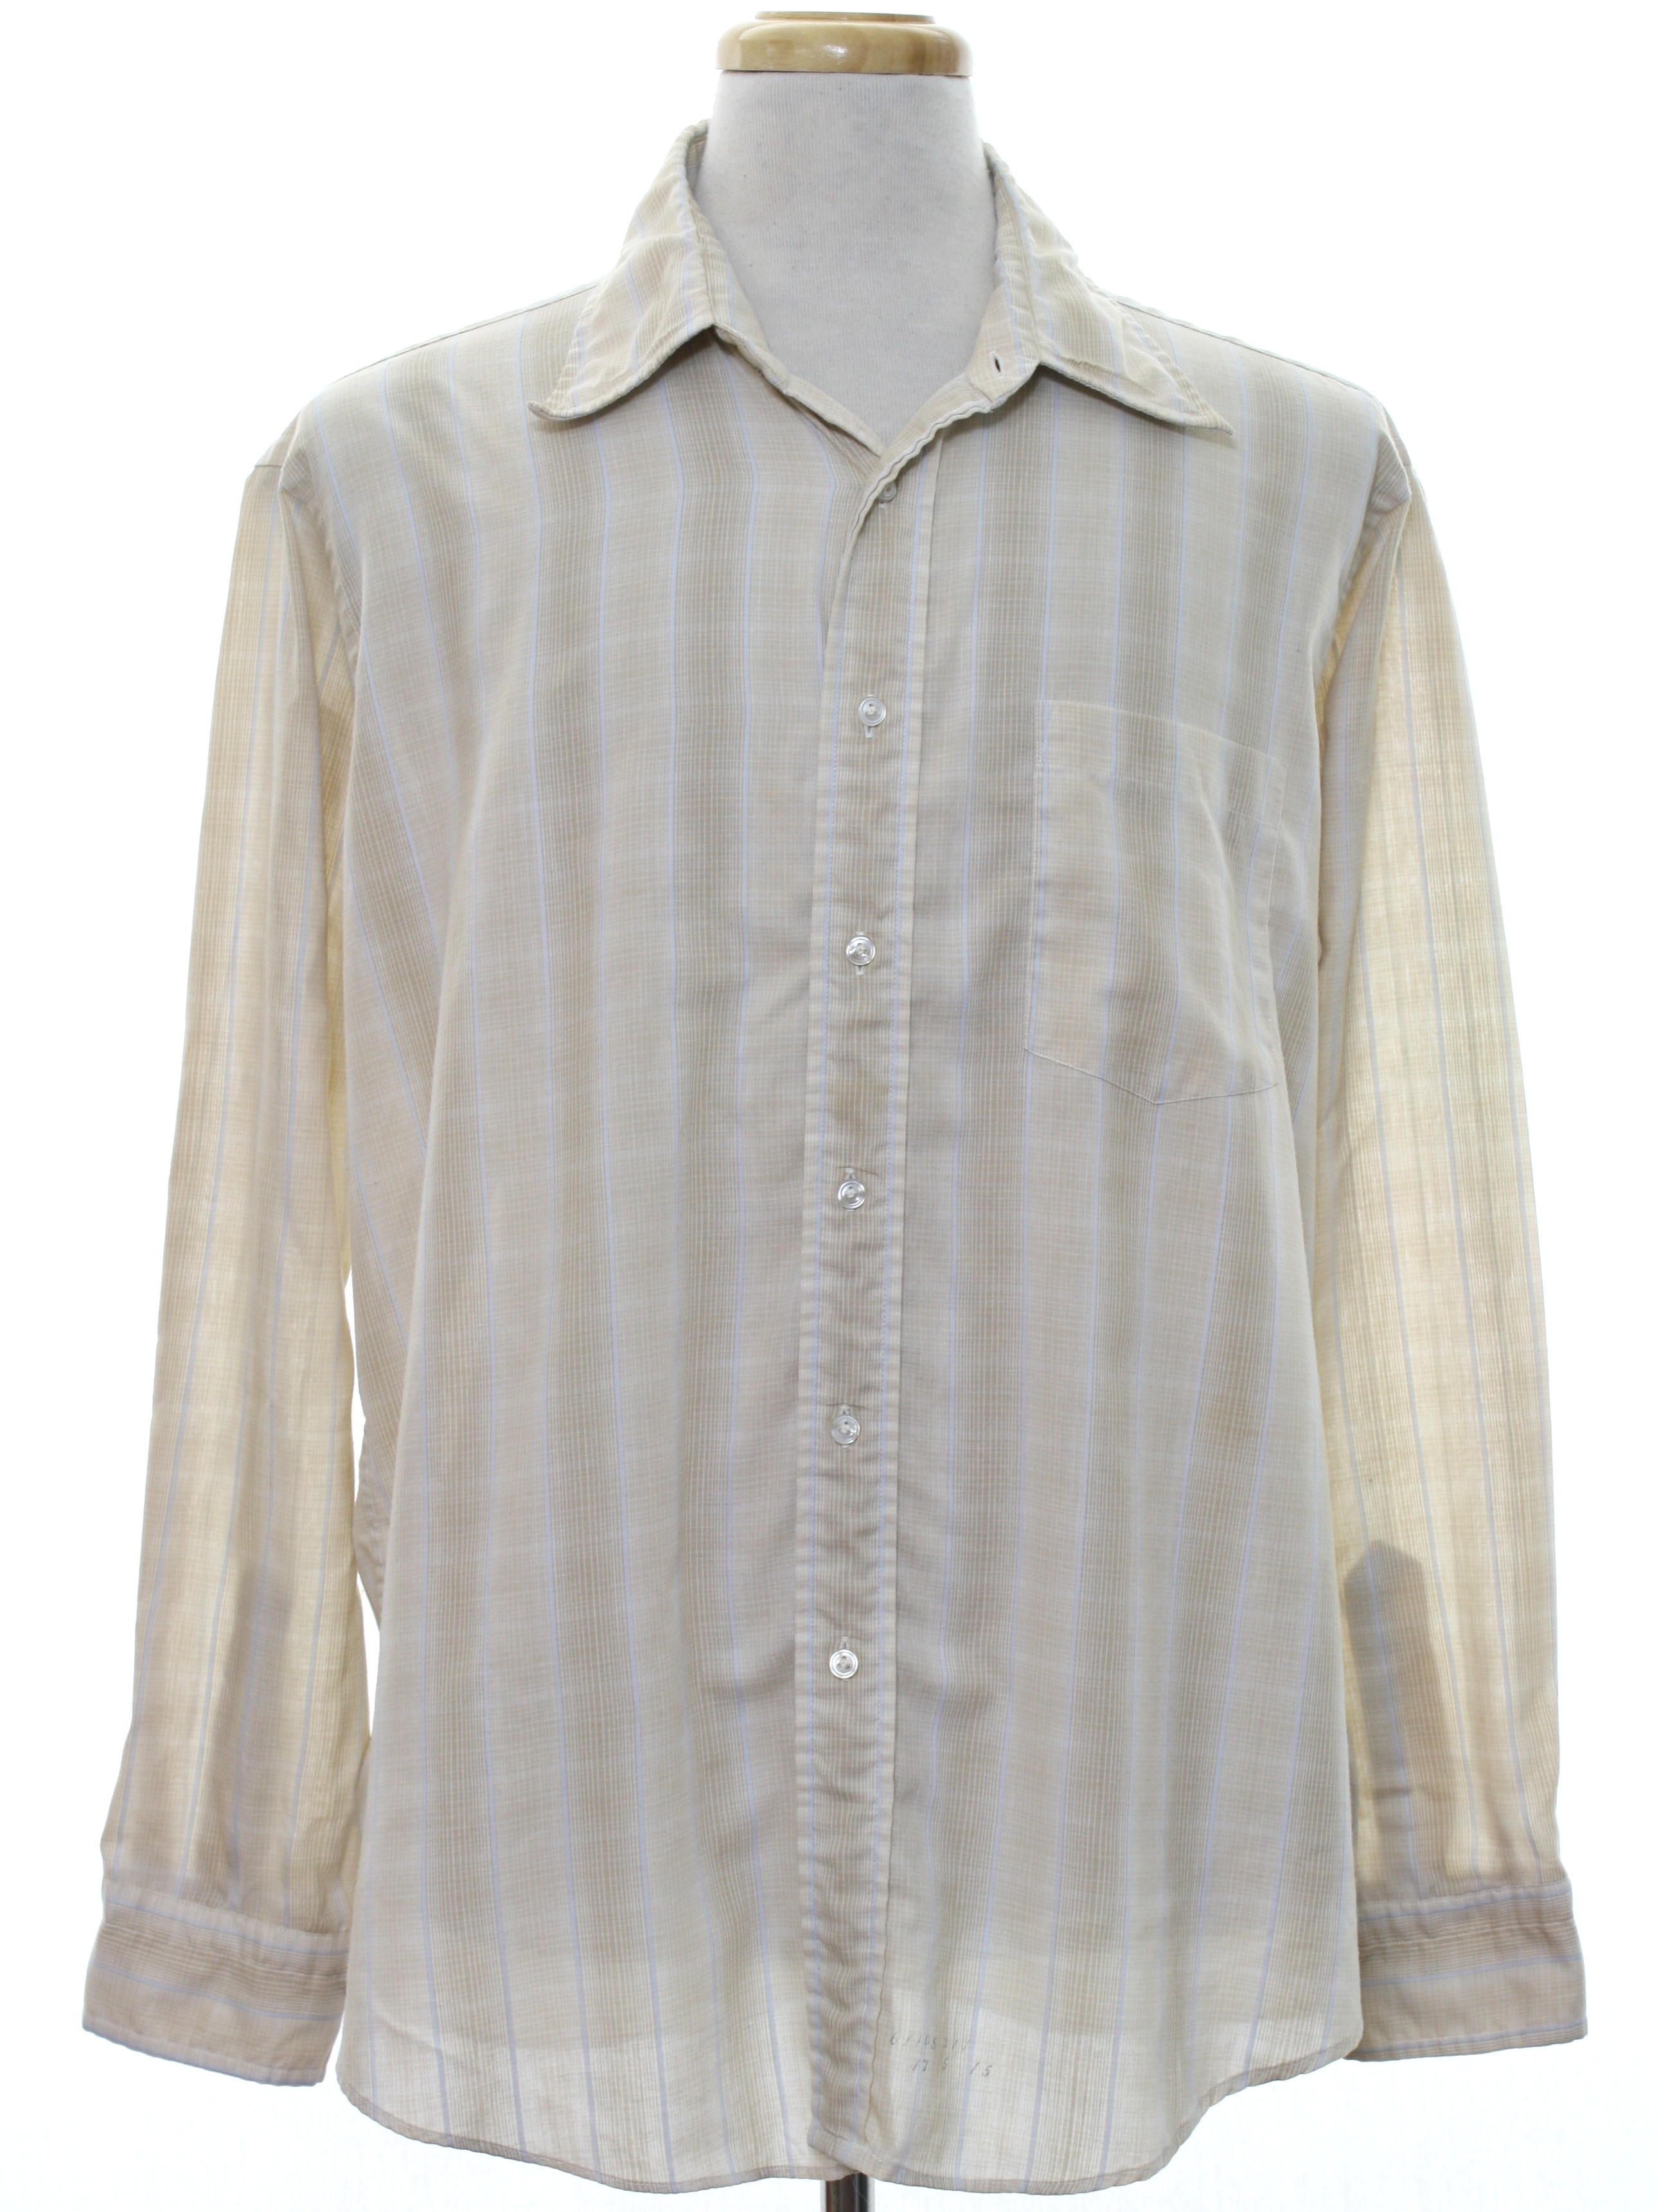 Woolf Brothers Seventies Vintage Shirt: 70s -Woolf Brothers- Mens light ...